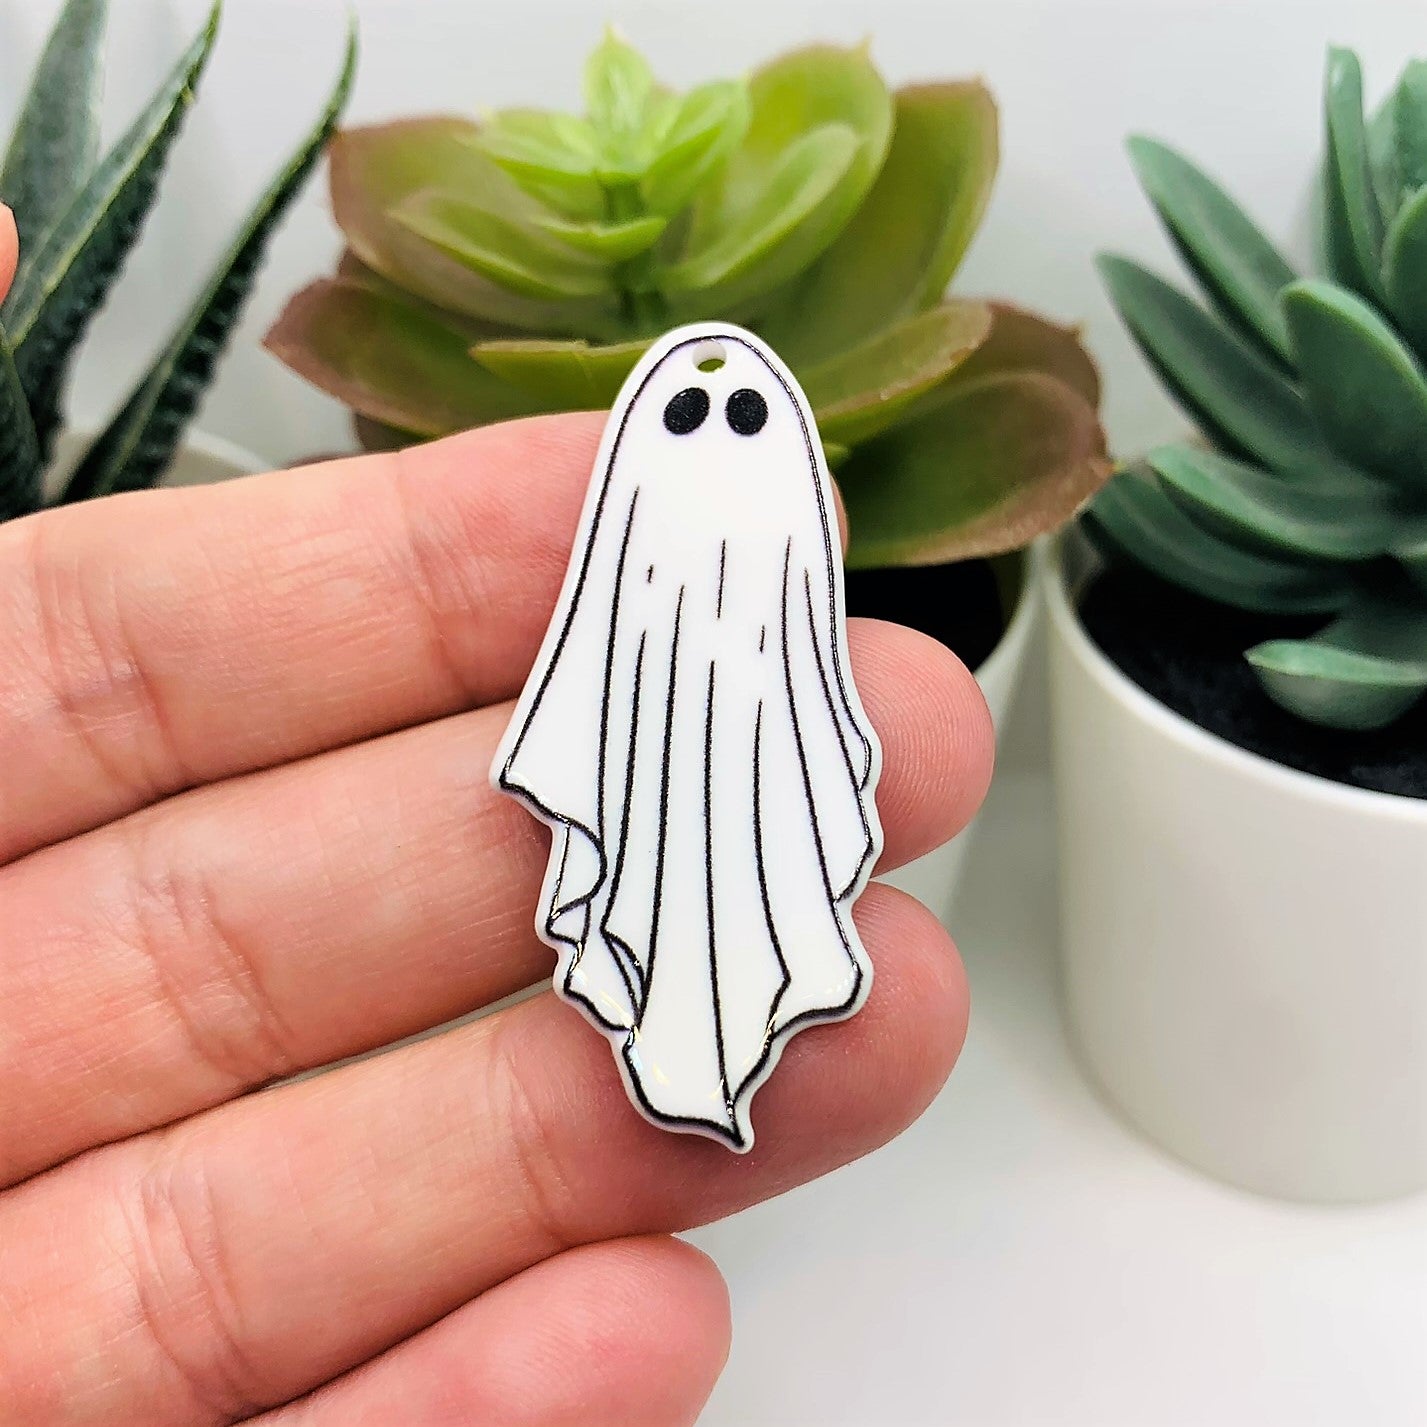 1, 4 or 20 Pieces: White Goth Ghost Halloween Charms: Double Sided